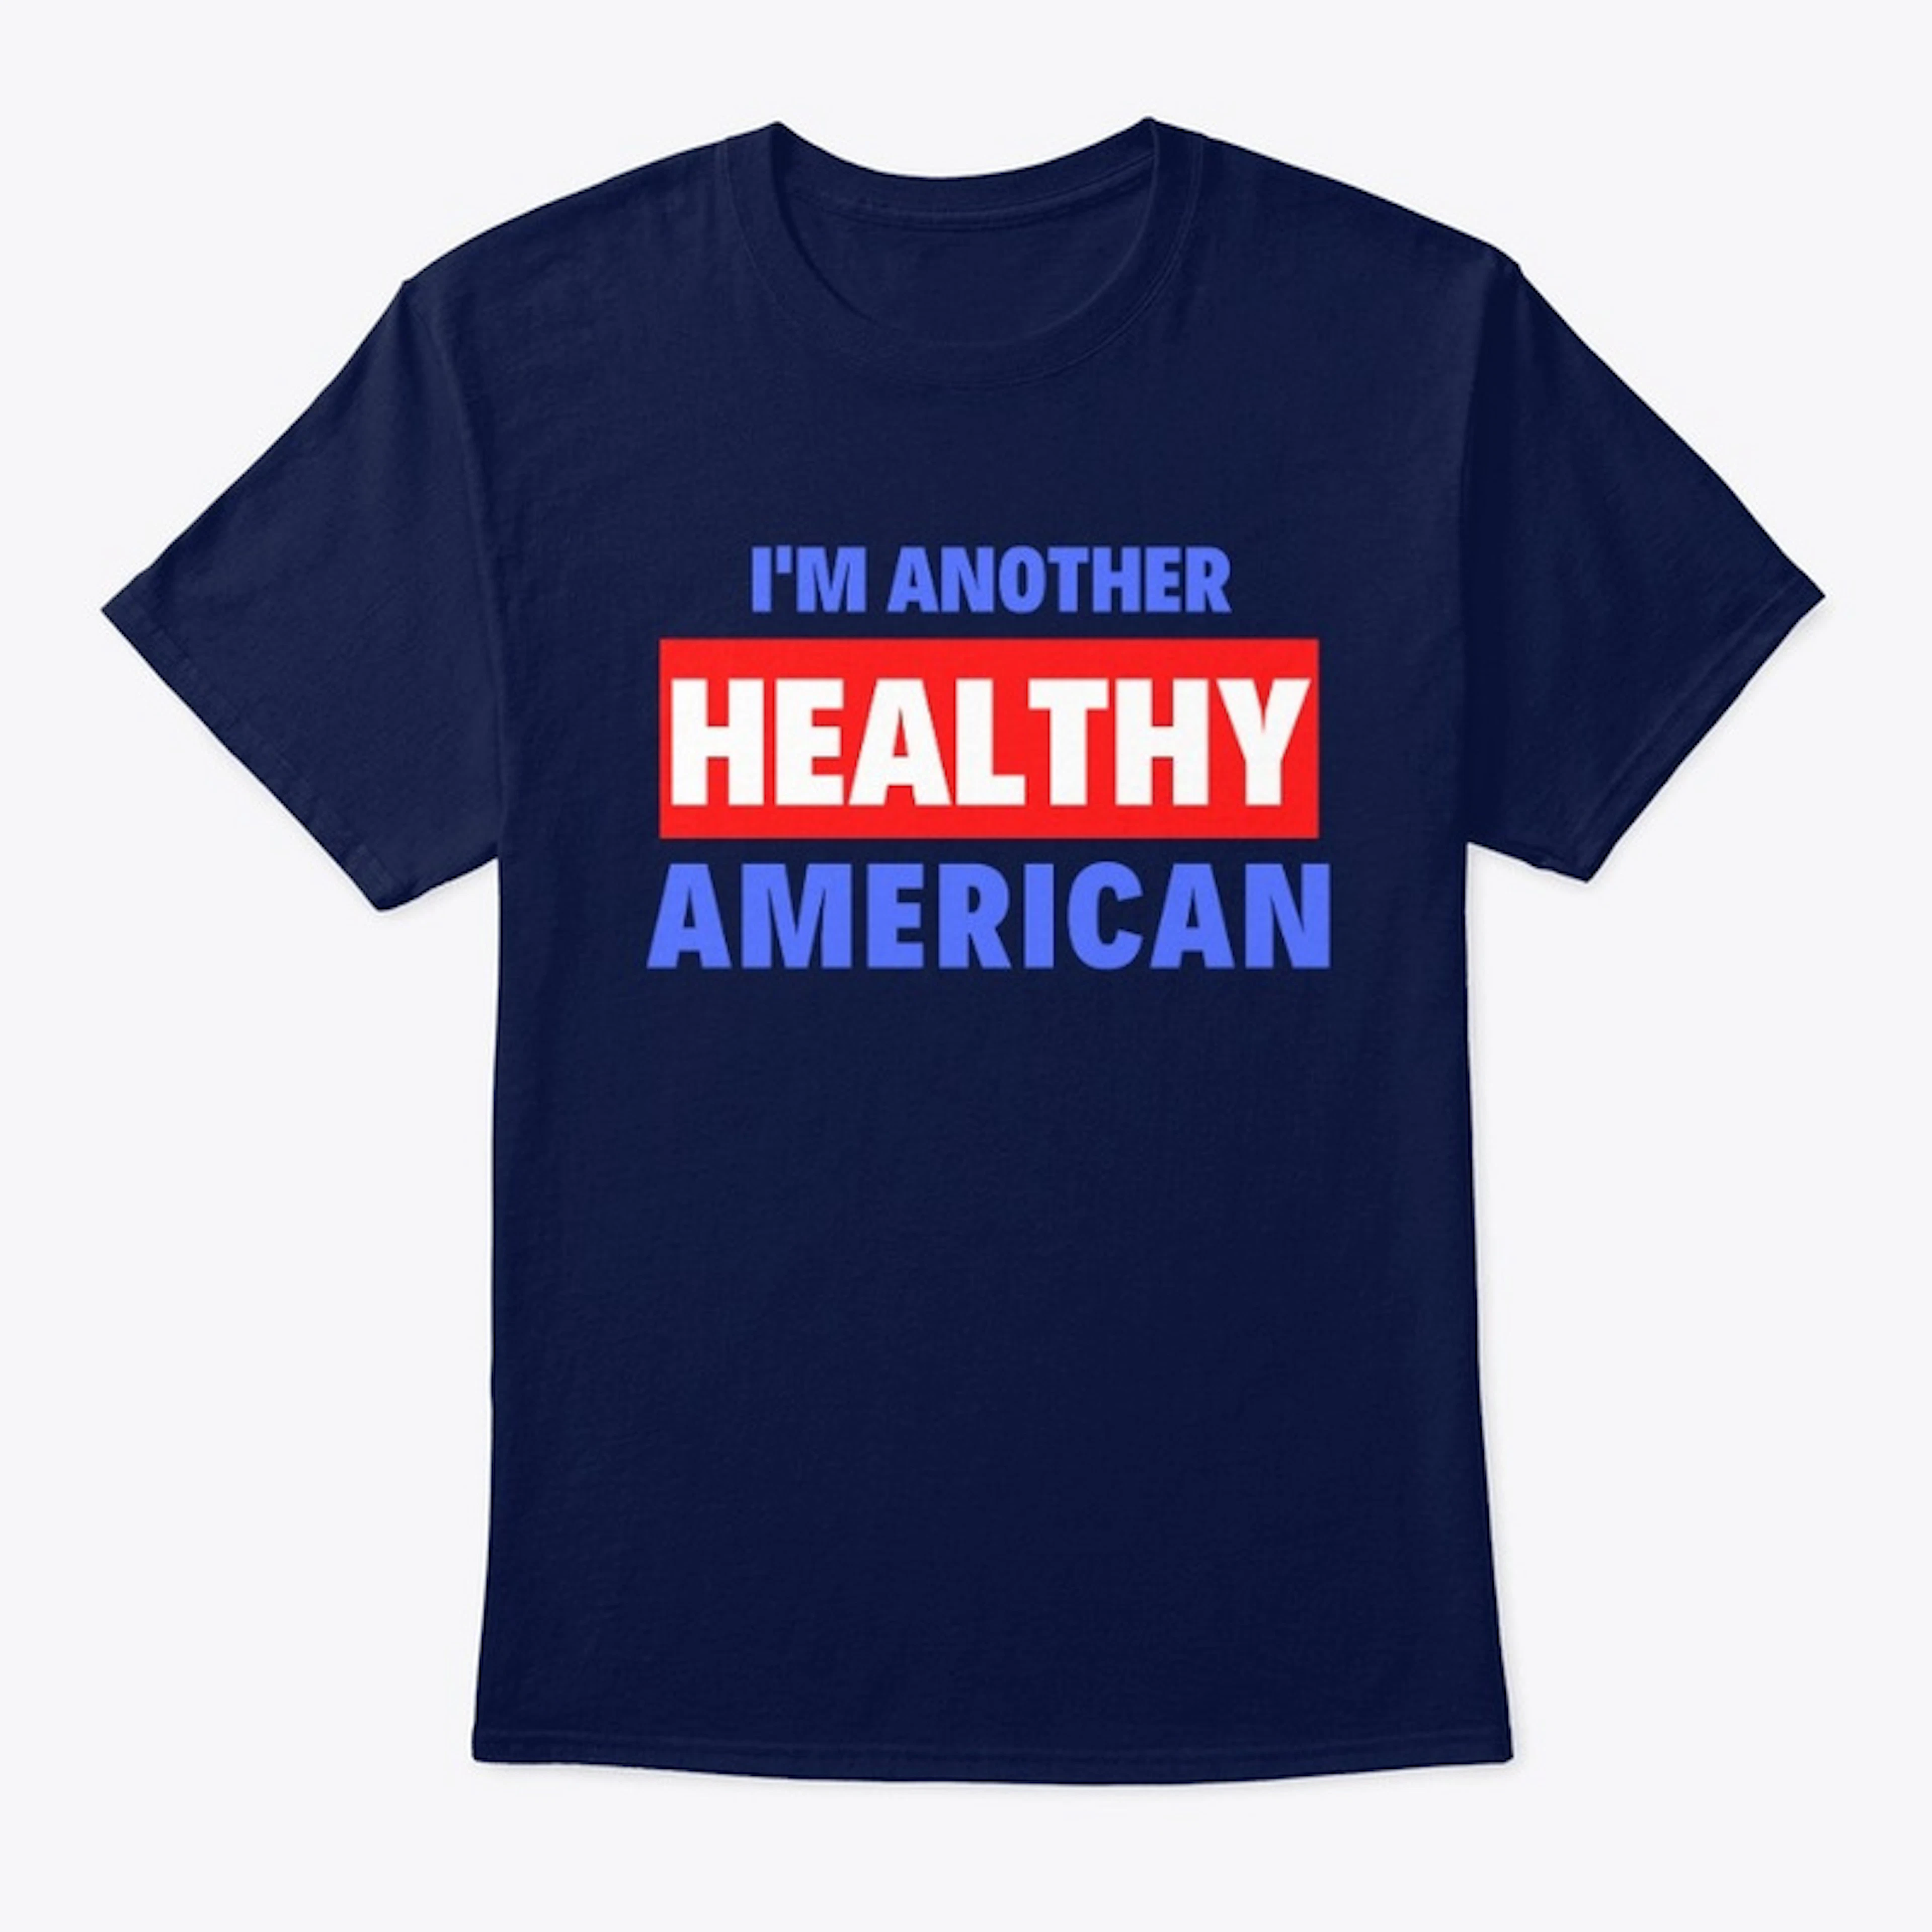 I'M ANOTHER HEALTHY AMERICAN